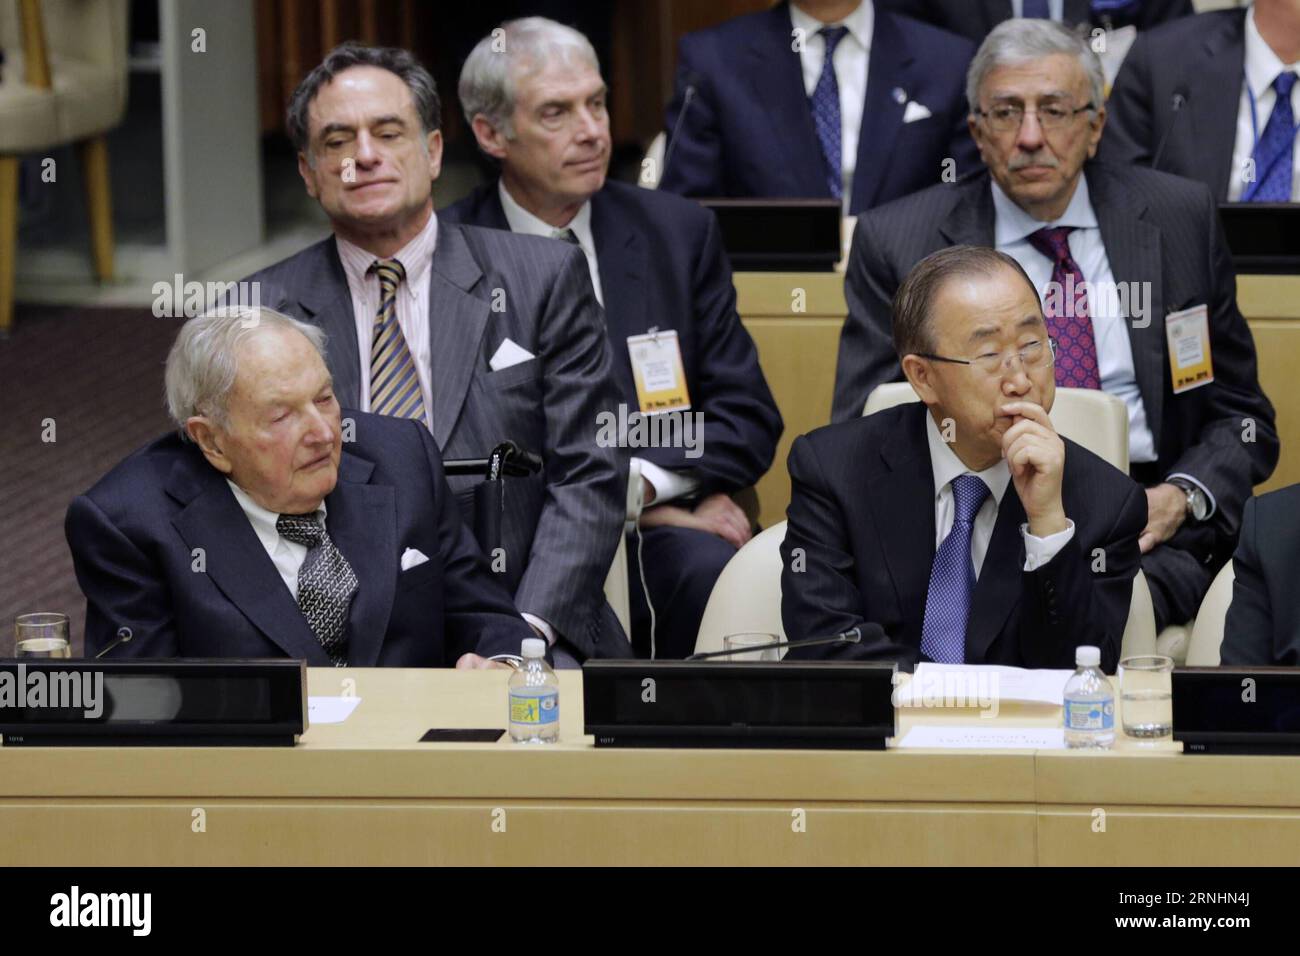 UNITED NATIONS, Nov. 29, 2016 -- United Nations Secretary-General Ban Ki-moon (front, R) and David Rockefeller (front,L) attend a memorial for Joseph Verner Reed at the United Nations headquarters in New York, the United States, Nov. 29, 2016. The United Nations on Tuesday held a memorial to pay tribute to Joseph Verner Reed, a U.S. veteran diplomat who served in 1987 as the UN under-secretary-general to head the then UN Department of Political and General Assembly Affairs. ) (gj) UN-NEW YORK-JOSEPH REED-MEMORIAL LixMuzi PUBLICATIONxNOTxINxCHN   United Nations Nov 29 2016 United Nations Secret Stock Photo